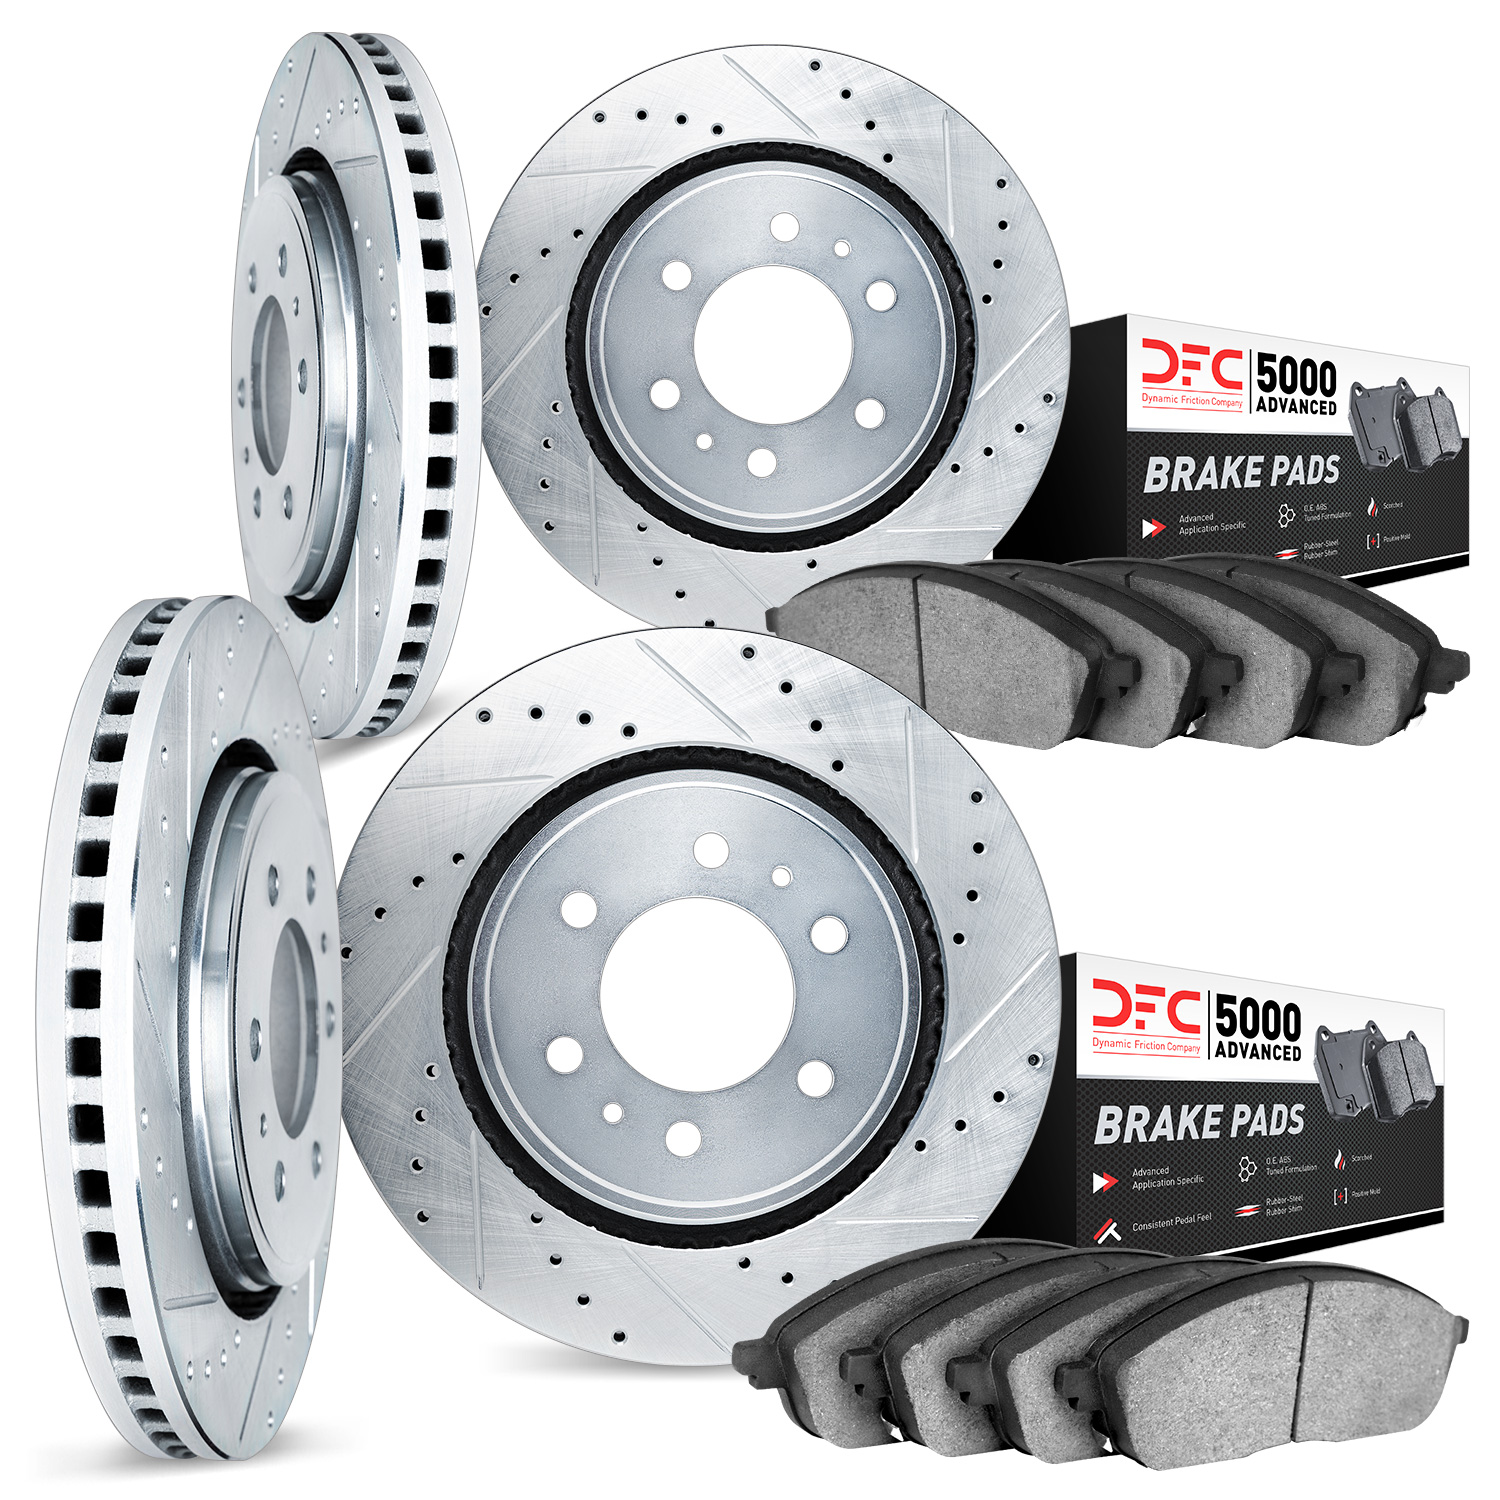 7504-48022 Drilled/Slotted Brake Rotors w/5000 Advanced Brake Pads Kit [Silver], 2002-2008 GM, Position: Front and Rear